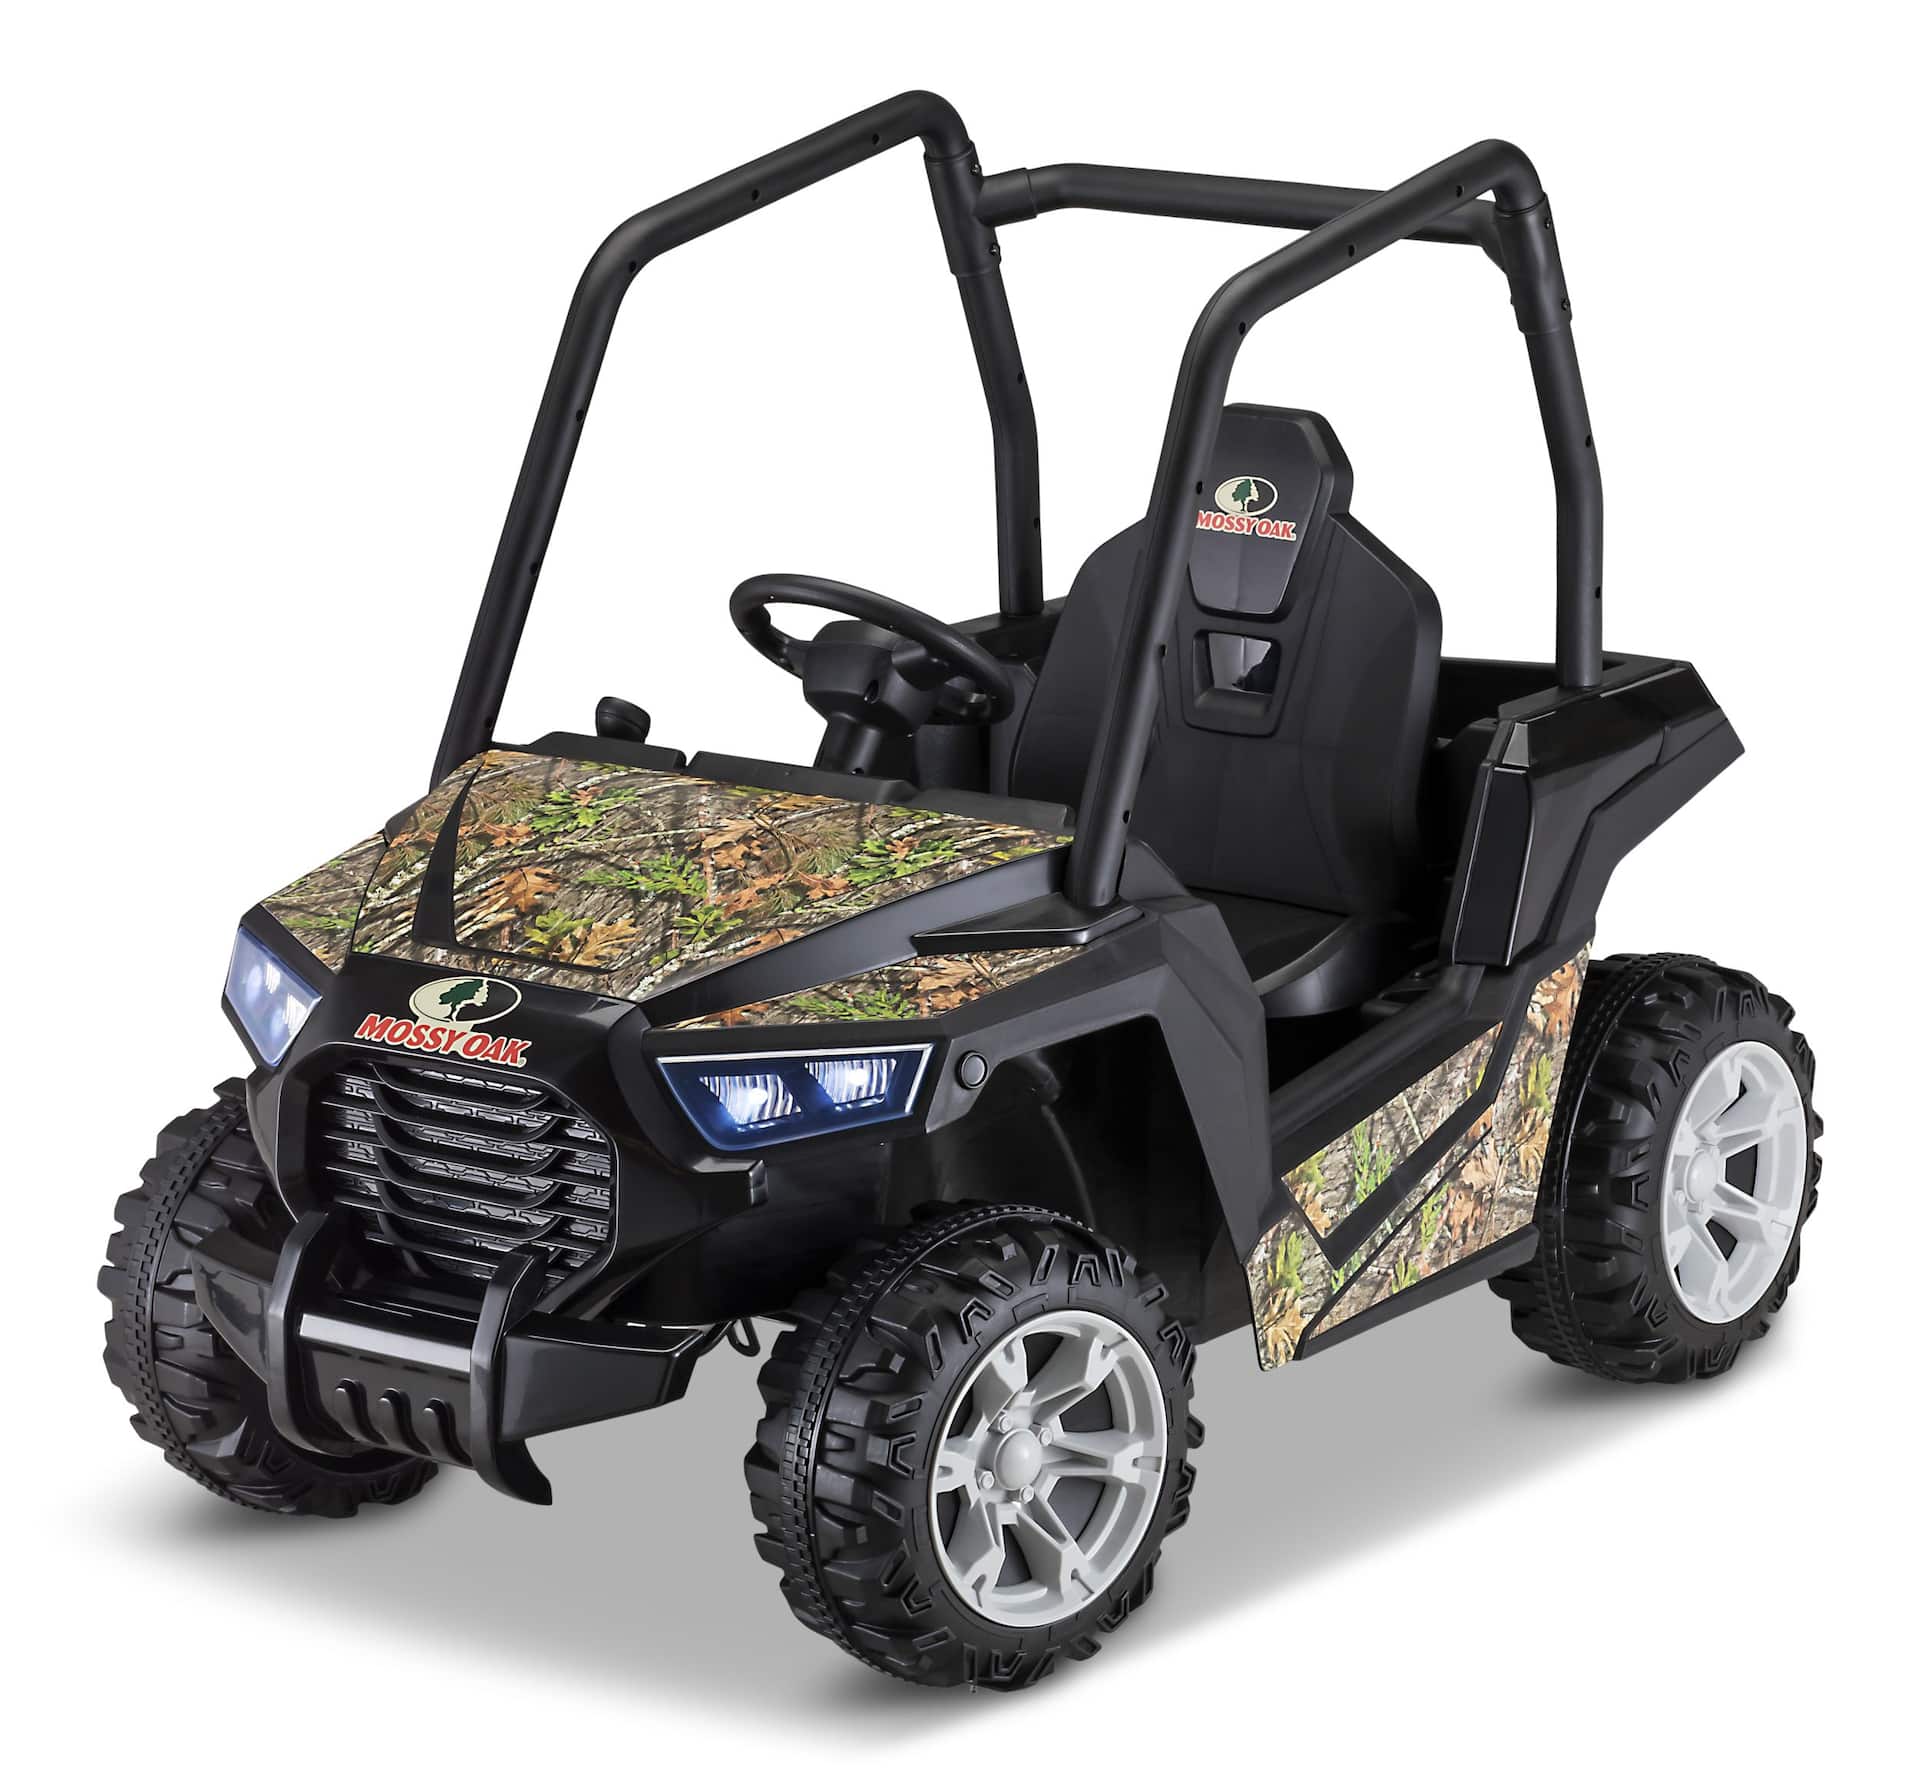 https://media-www.canadiantire.ca/product/playing/cycling/wheeled-goods/1840684/6v-whipsaw-utv-electric-ride-on-a7ac2764-75d9-427a-b7d5-36ece19a6e00-jpgrendition.jpg